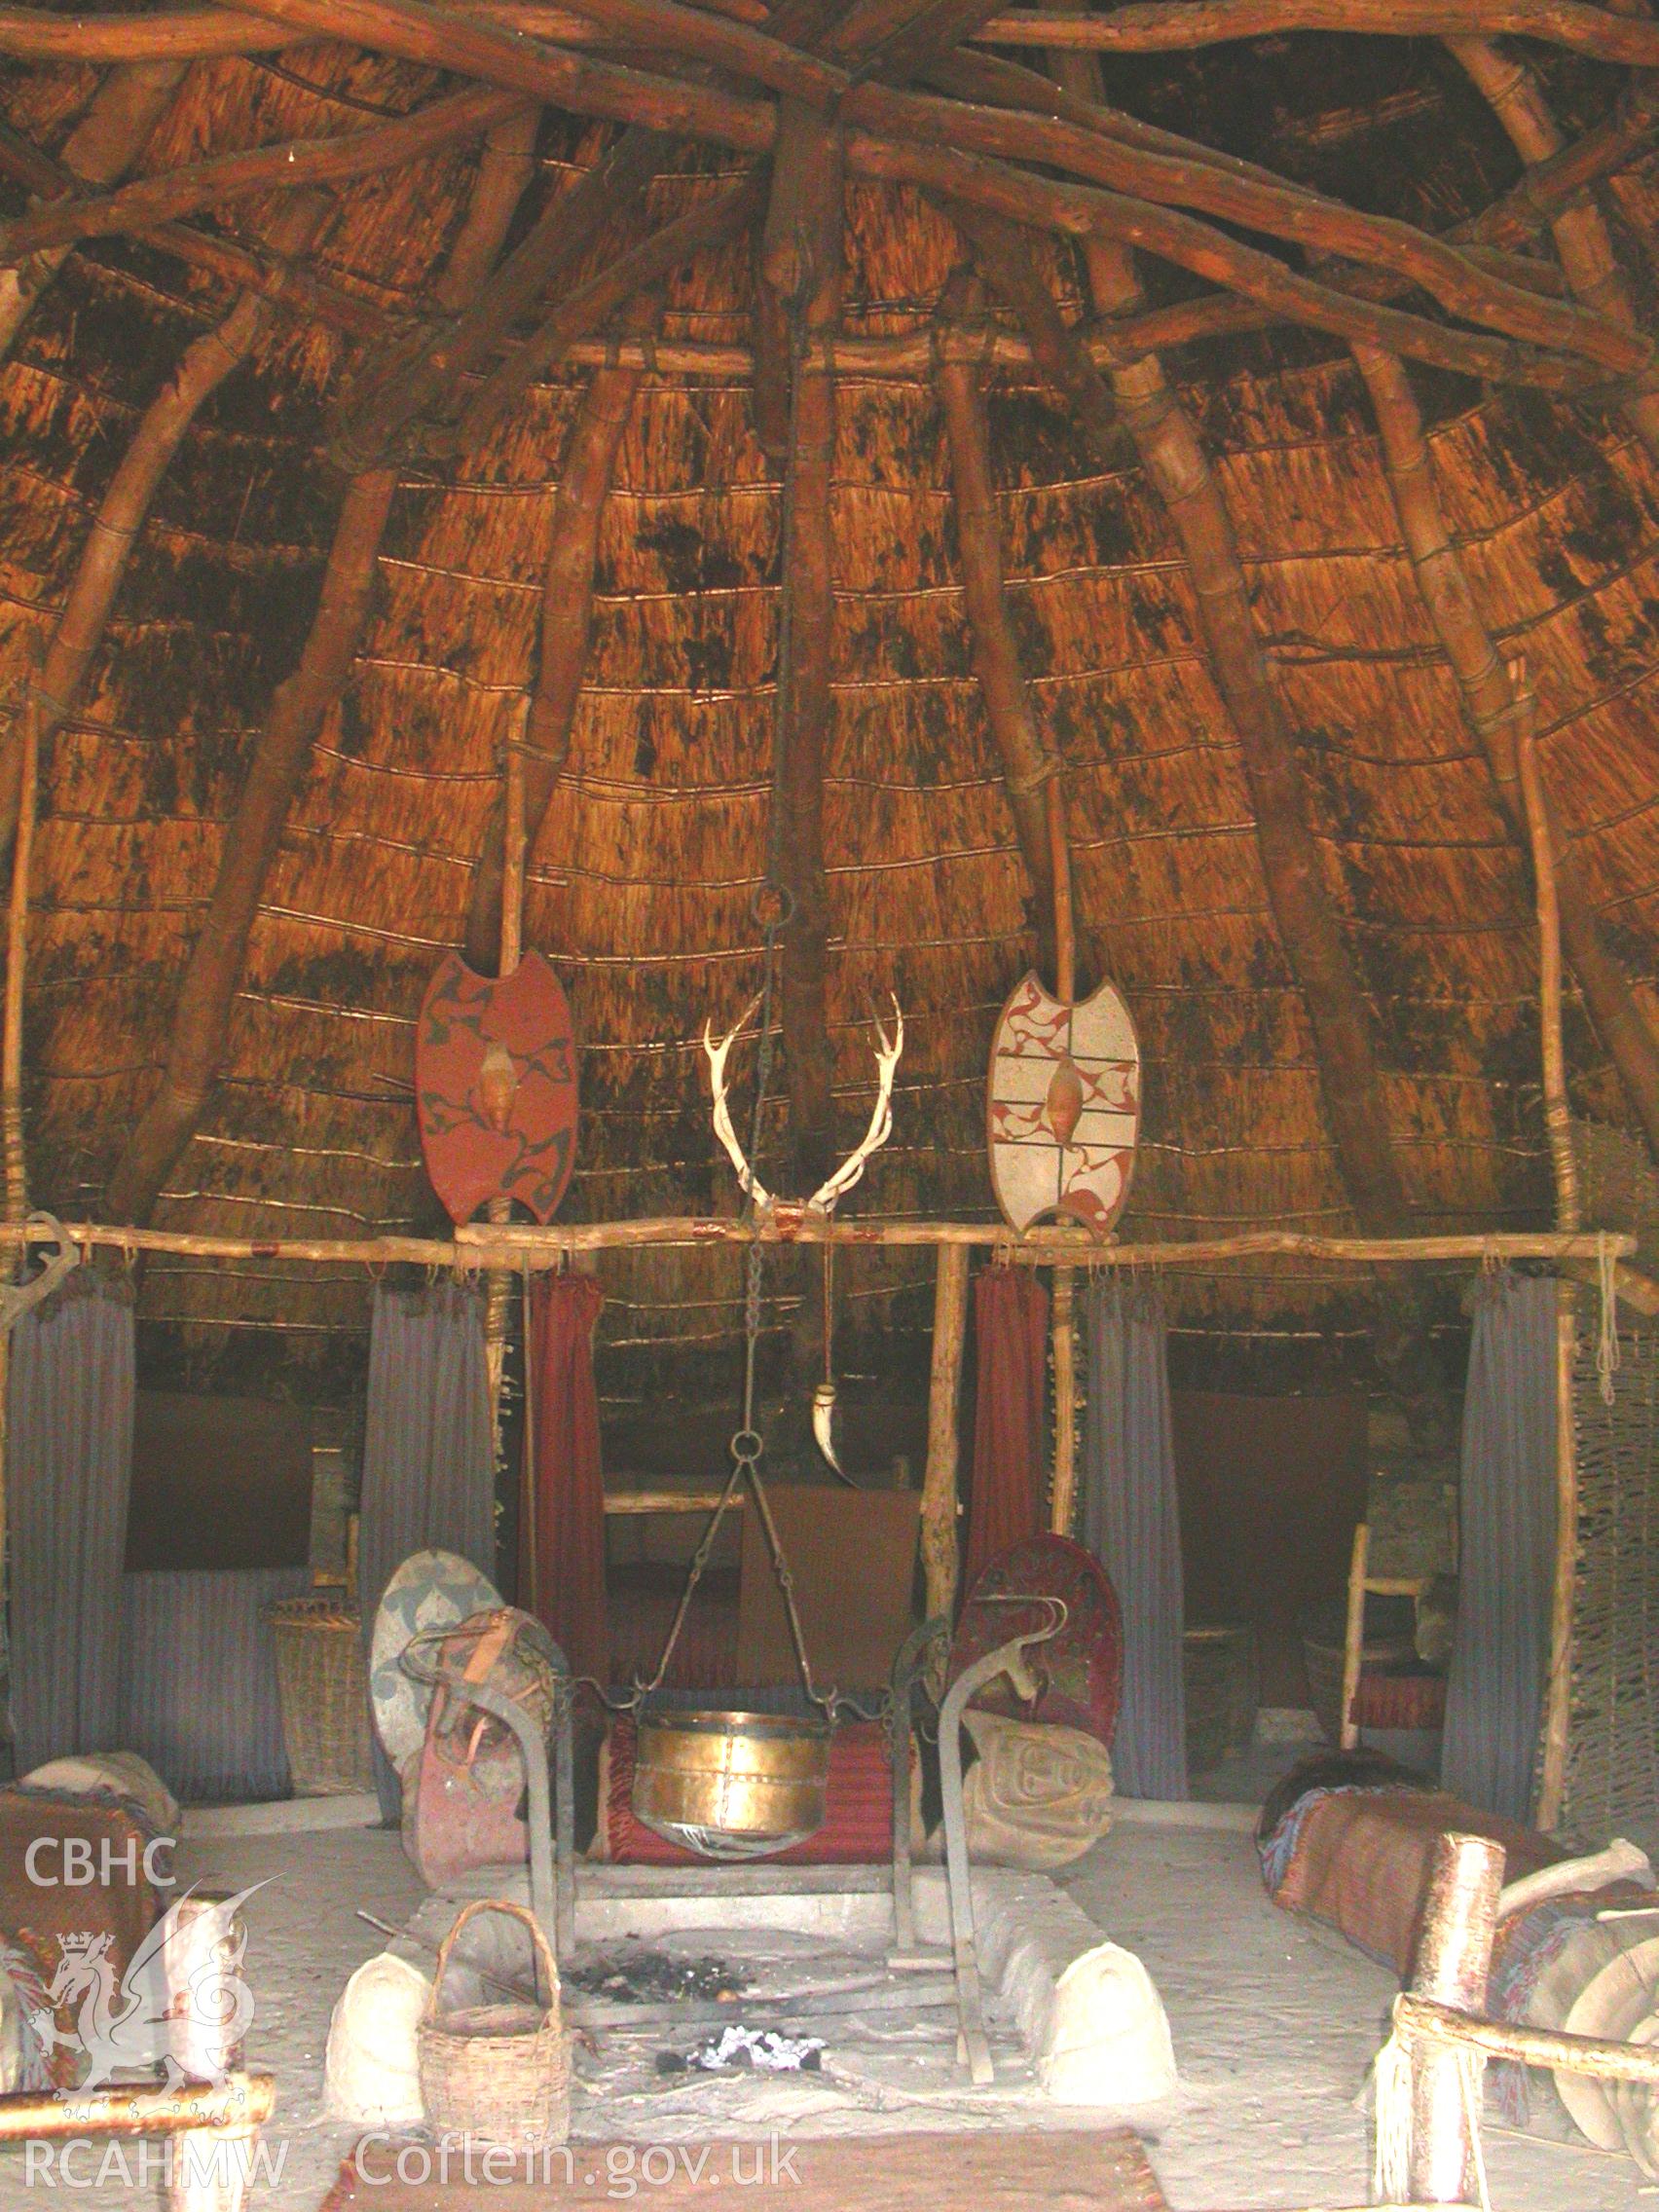 Central hearth in chieftian's house from entrance.